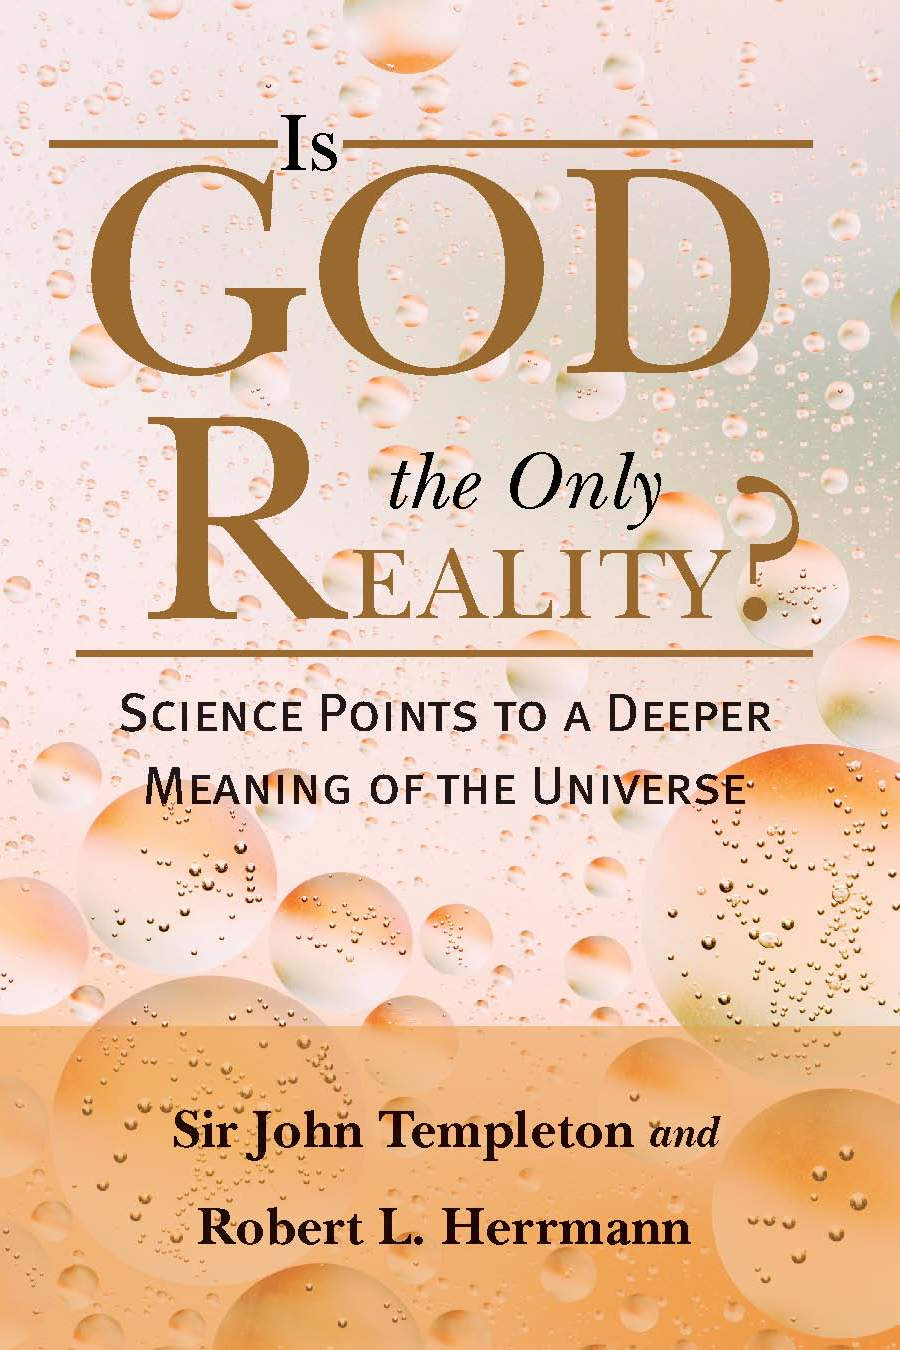 Is God the Only Reality? Science Points to a Deeper Meaning of the Universe John Marks Templeton and Robert L. Herrmann